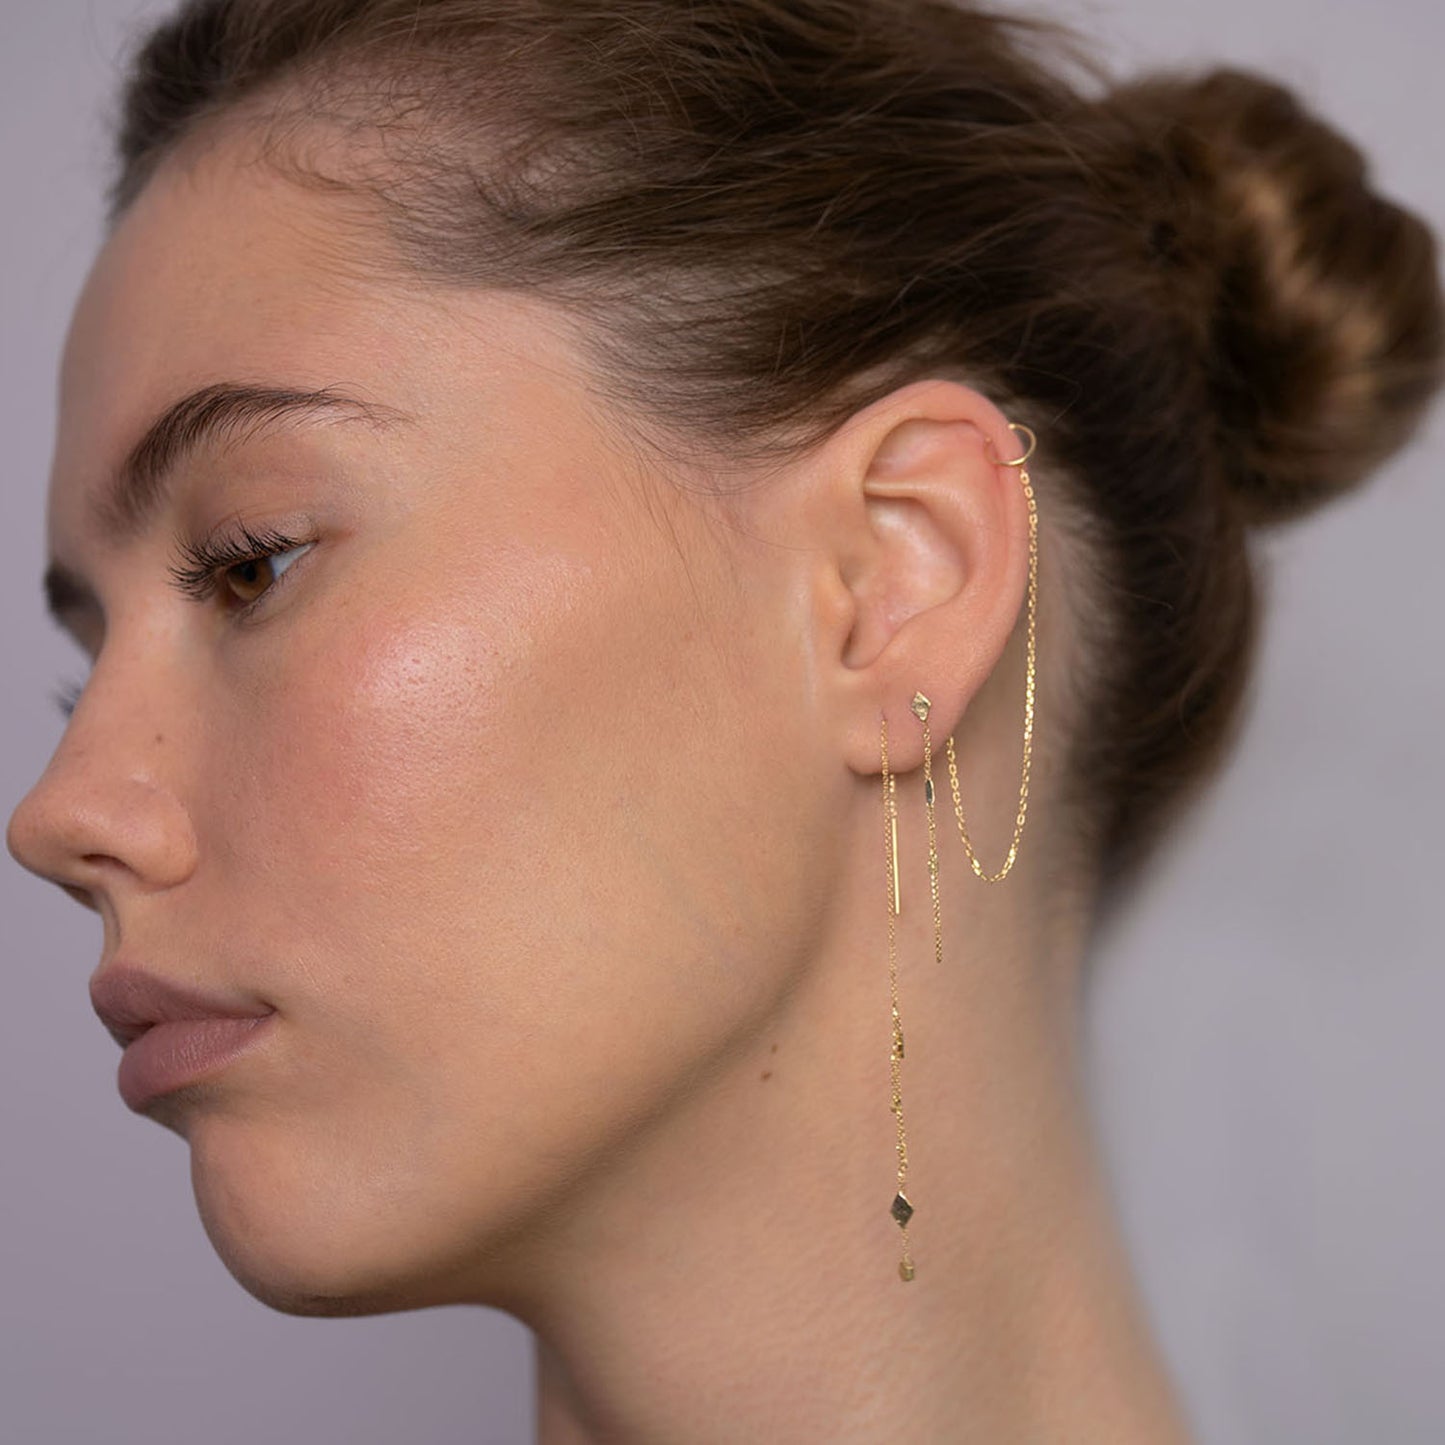 18ct Gold thread through earrings with mixed gold shaped and chains on model